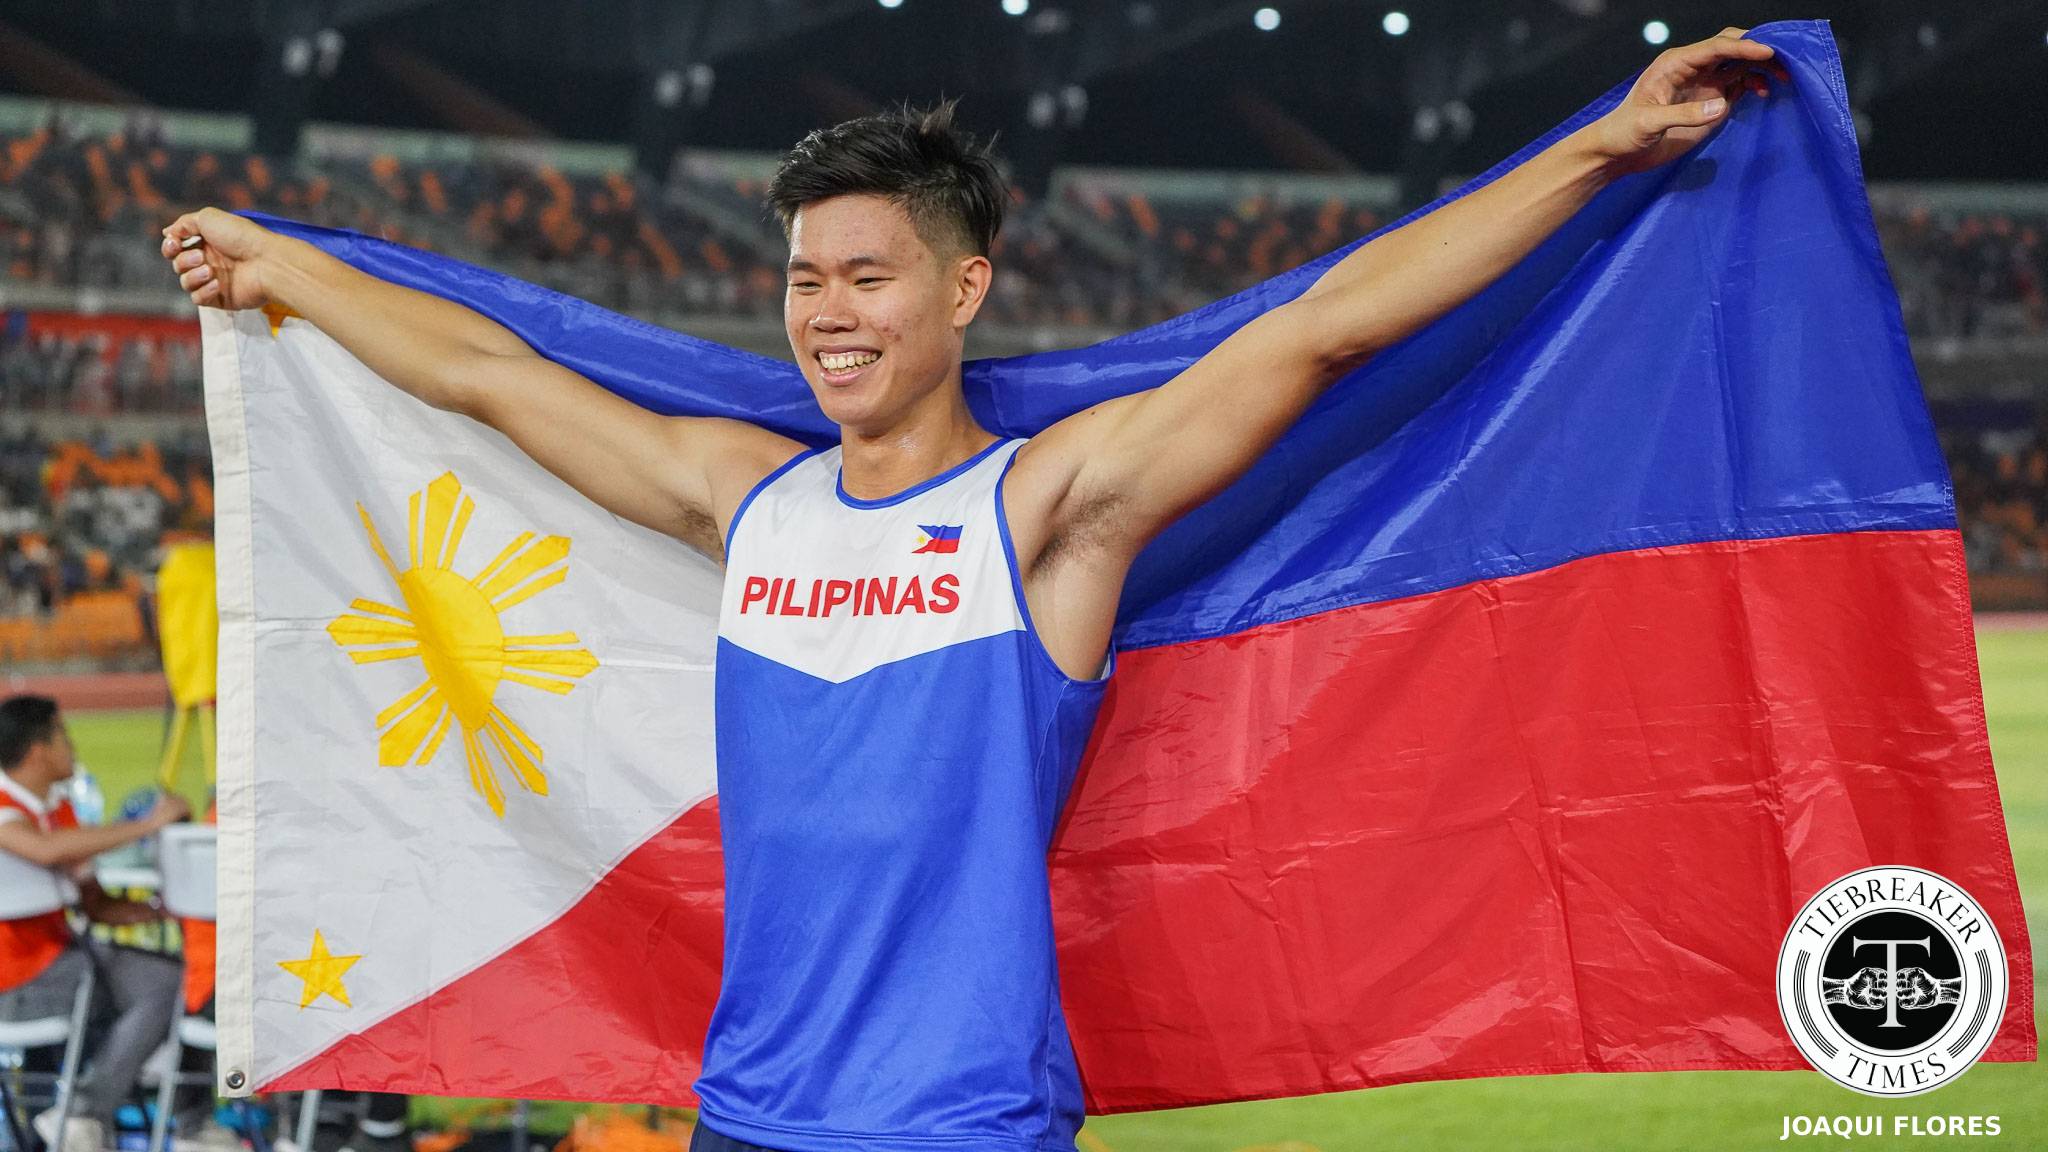 2019-Sea-Games-Obiena-1253-1 EJ Obiena gets support from Hidilyn Diaz, Eumir Marcial Boxing News Track & Field Weightlifting  - philippine sports news